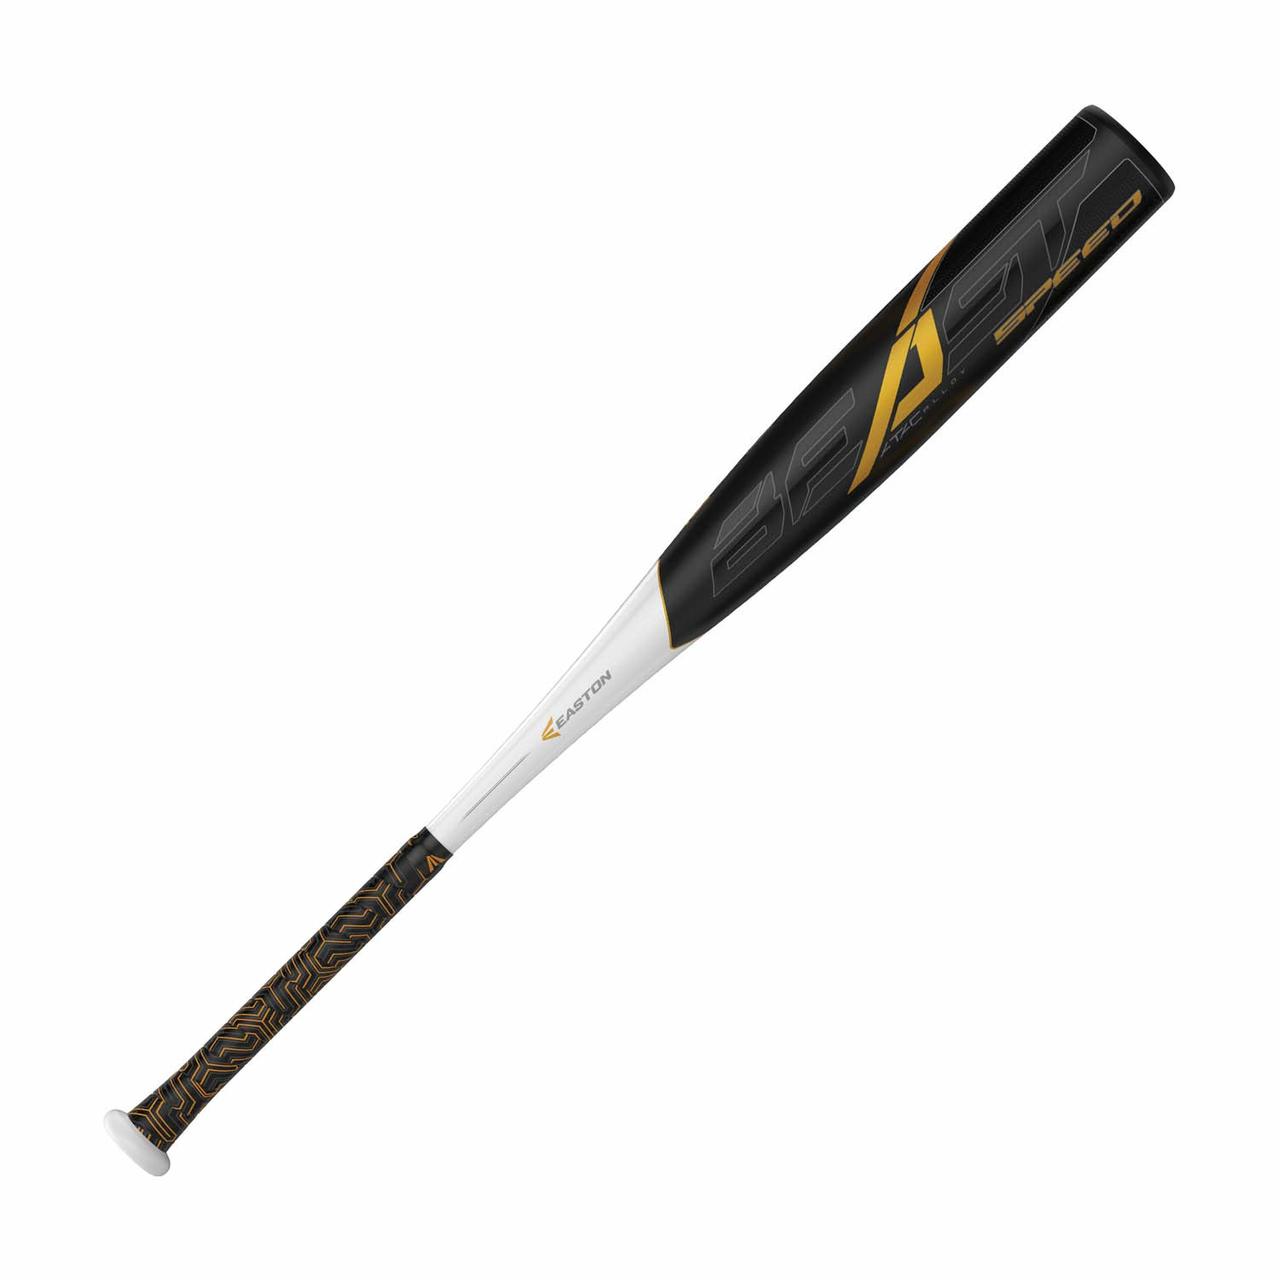 easton-beast-speed-10-usssa-baseball-bat-29-in-19-oz-sl19bs10 SL19BS10-2919 Easton 628412233849 ATAC Alloy –Advanced Thermal Alloy Construction provides the lightest and strongest